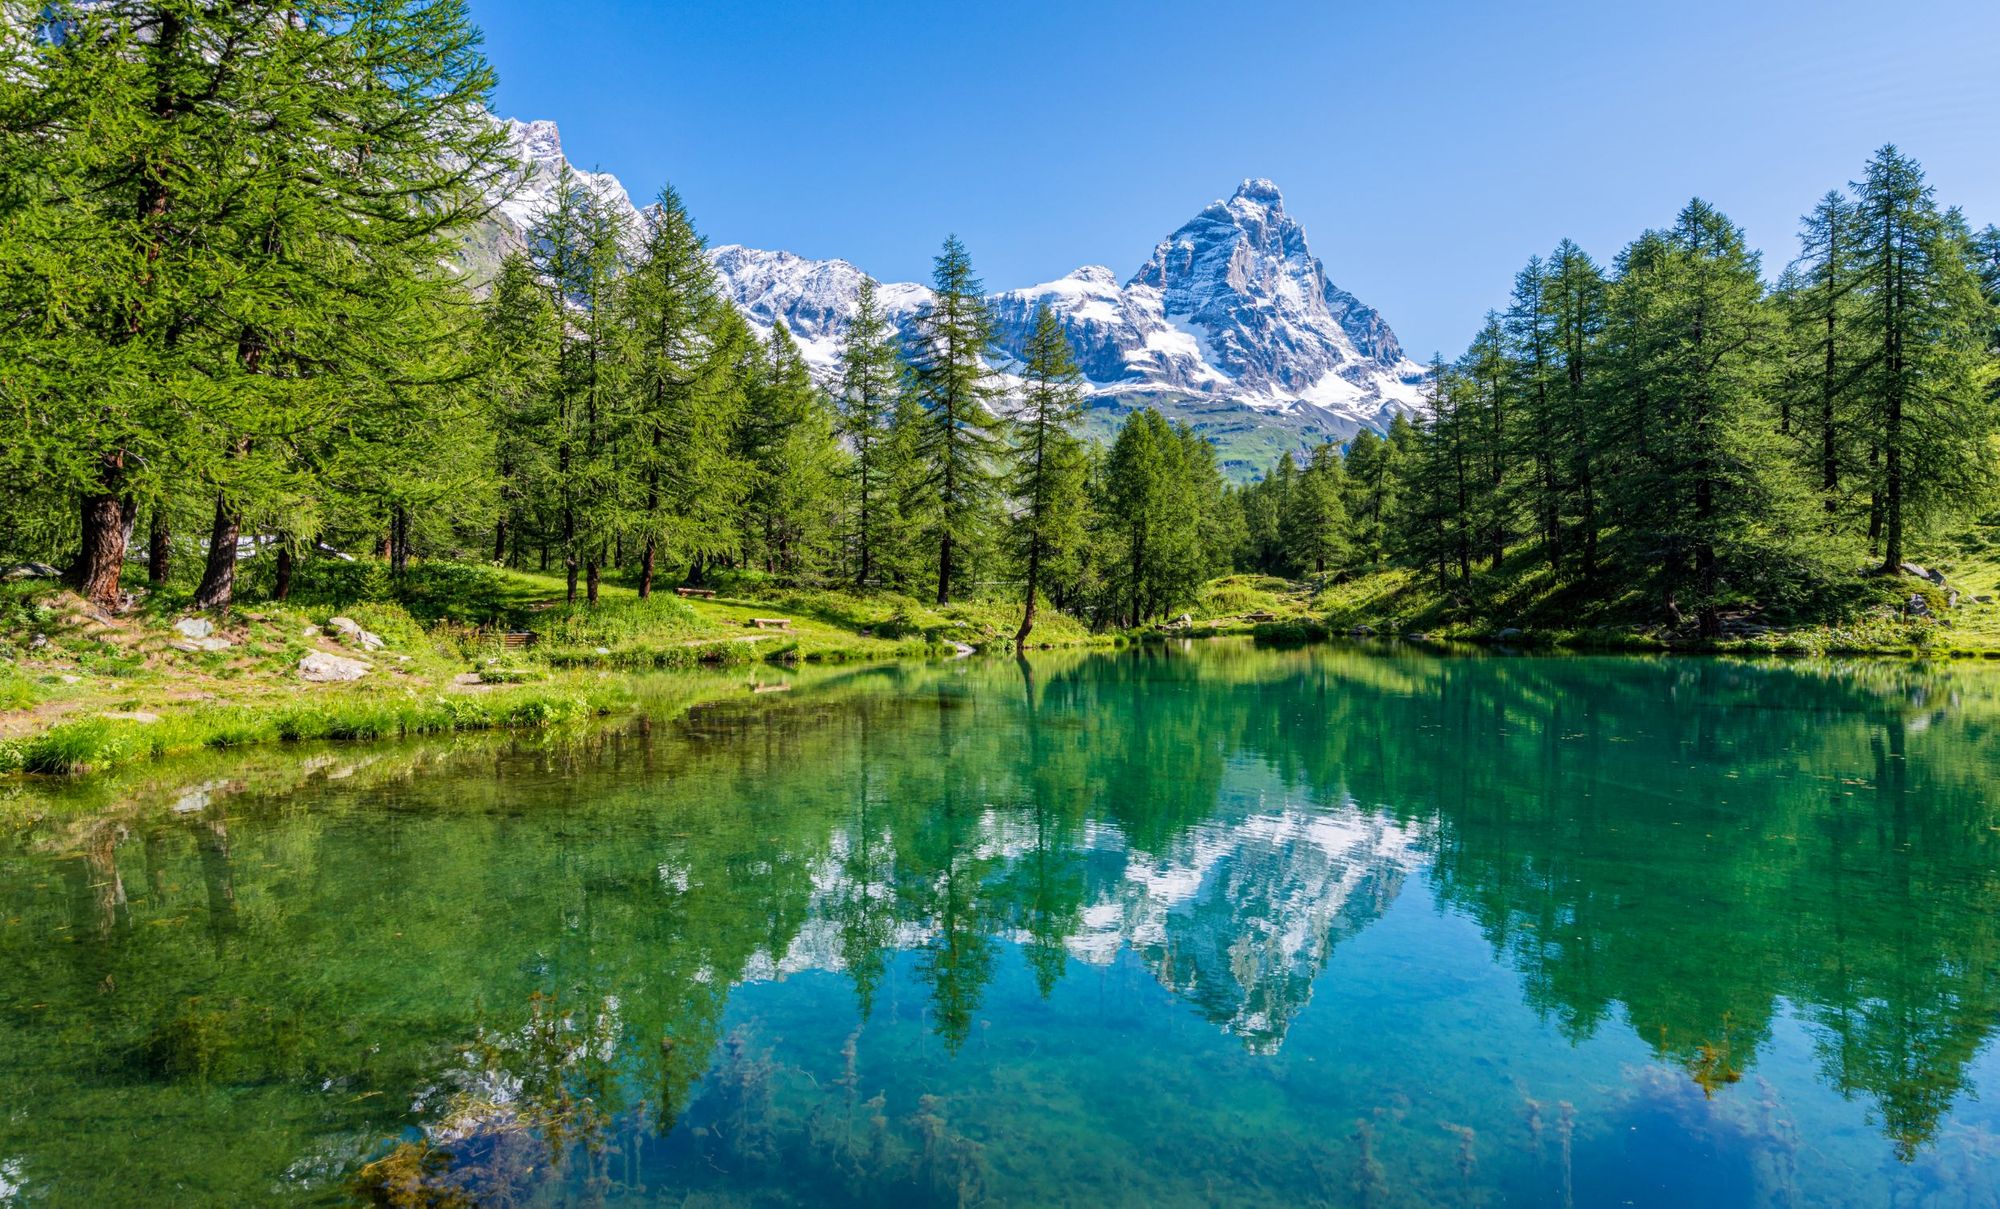 An idyllic morning view at the Blue Lake, with the Matterhorn reflecting on the water, in Valtournenche, near Cervinia. Photo: Getty